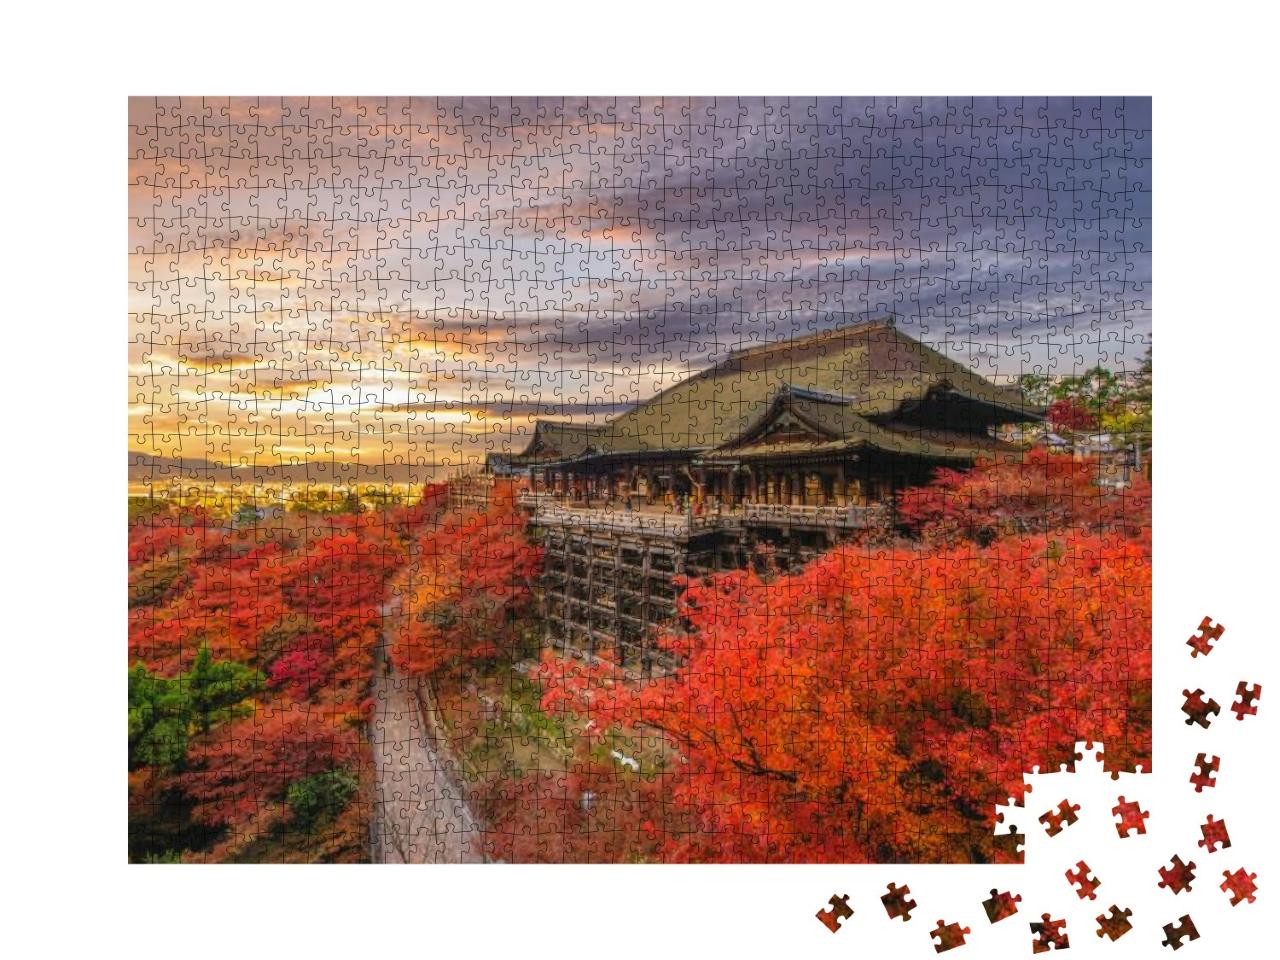 Kiyomizu-Dera Stage At Kyoto, Japan in Autumn... Jigsaw Puzzle with 1000 pieces